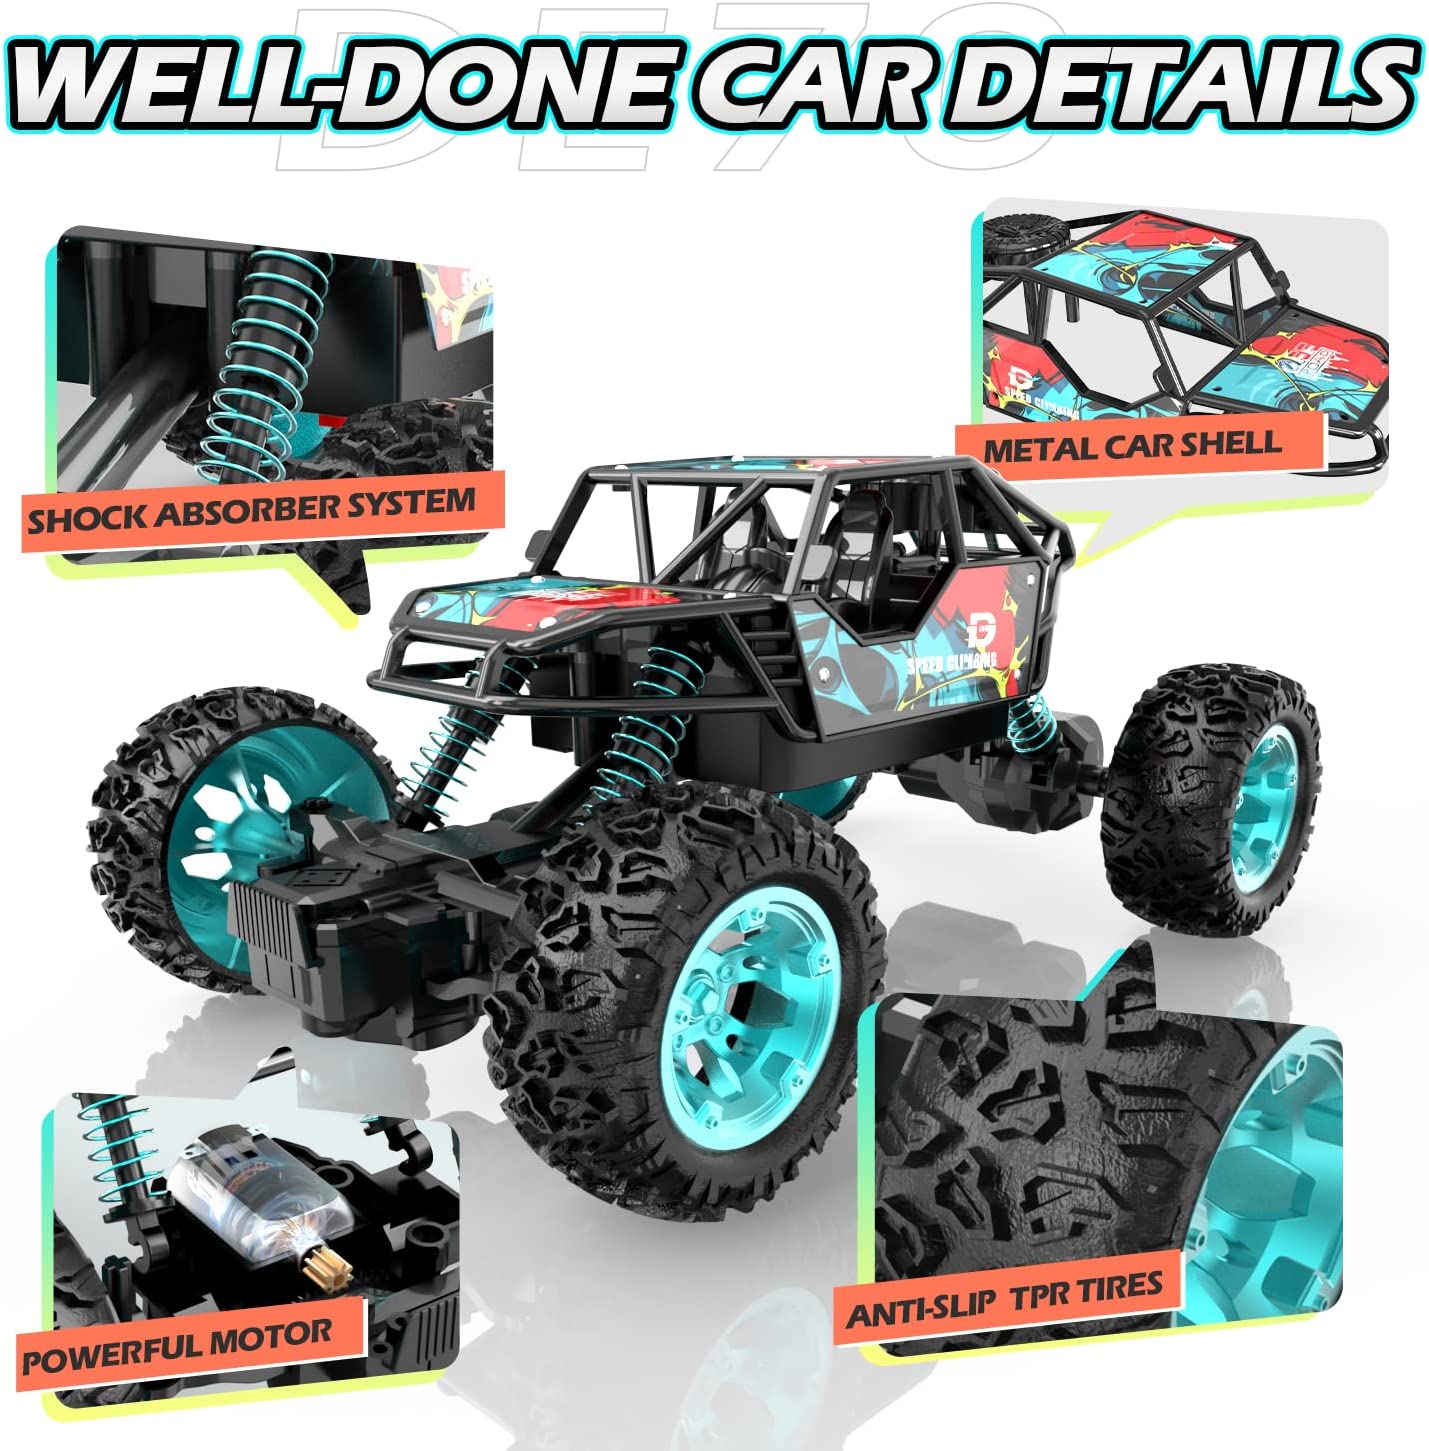 DEERC DE70 Remote Control Truck W/ Metal Shell, 60+ Mins, 2.4G Remote Control Car, 1:22 RC Cars Crawler for Boys, RC Monster Trucks, Toy Vehicle Car Gift for Kids Adults Girls